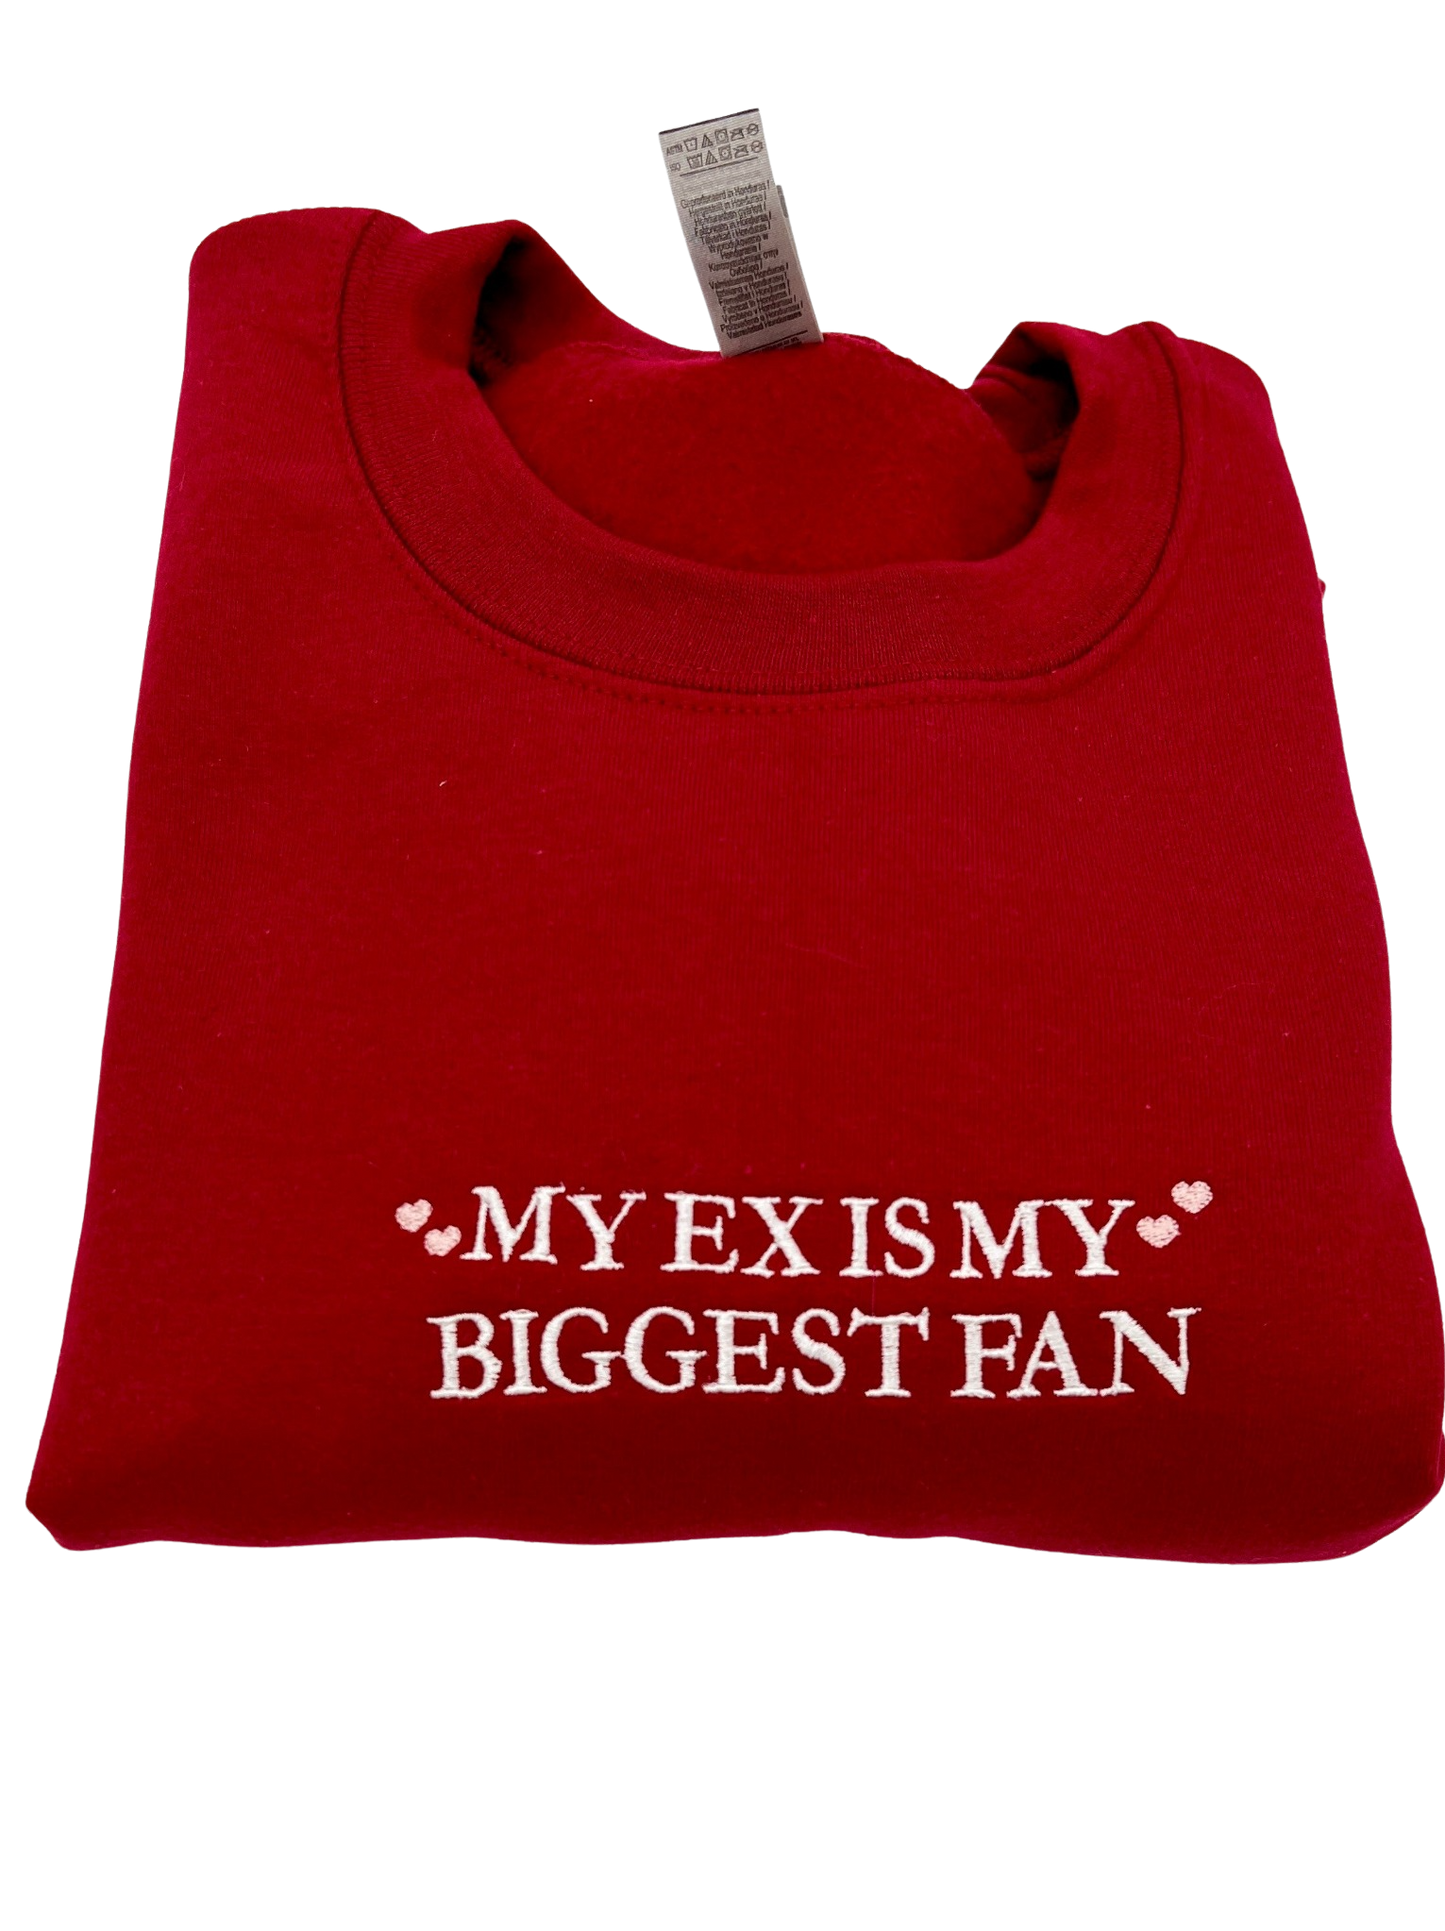 My Ex Is My Biggest Fan Embroidered Crewneck